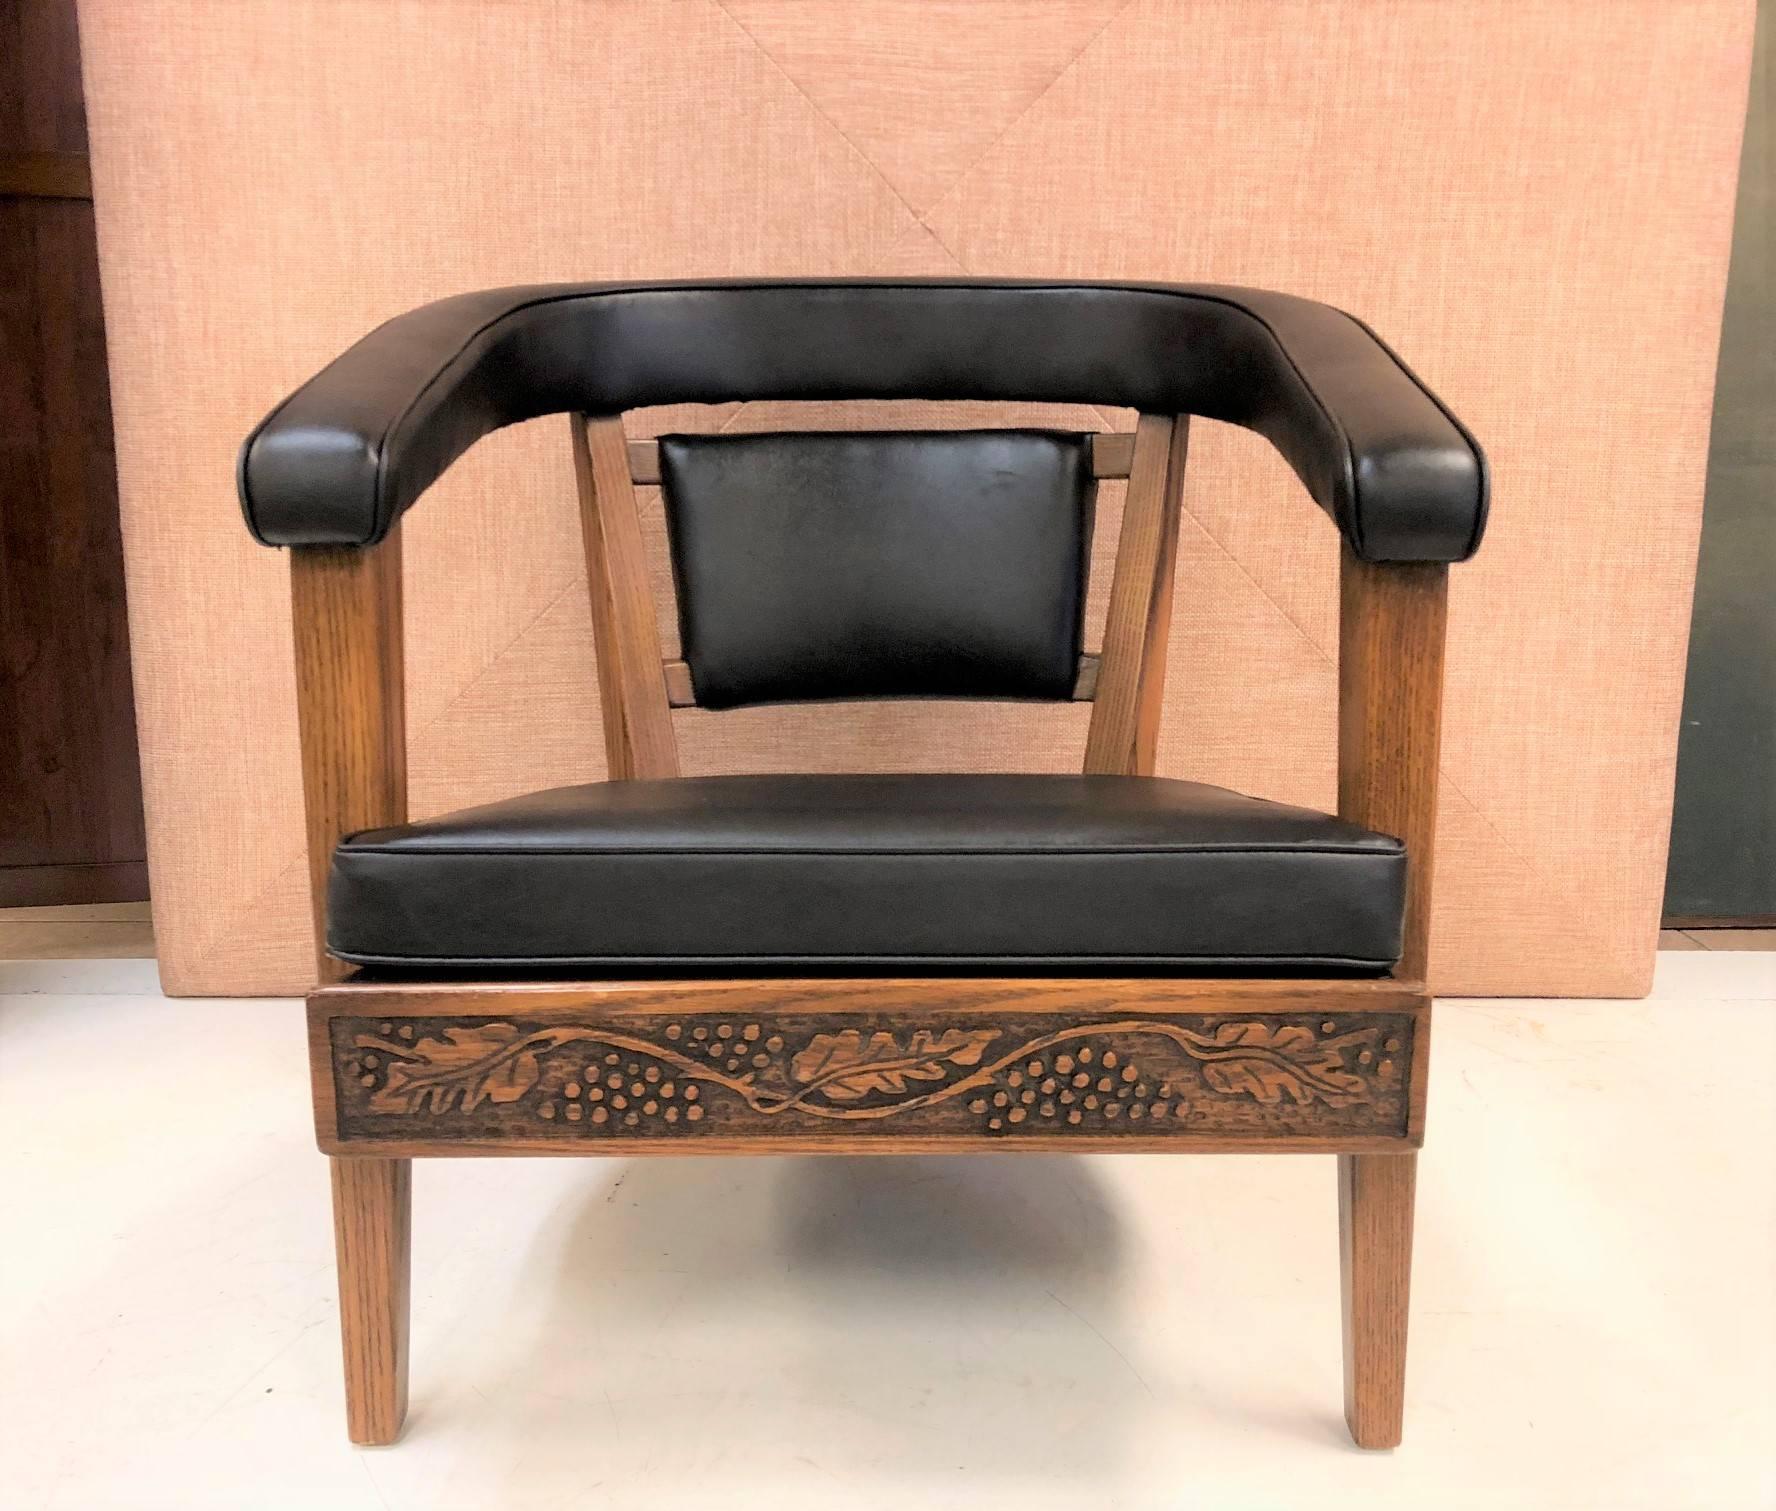 Pair of Romweber carved oak lounge chairs newly upholstered in black vinyl. Frames are heavily carved.